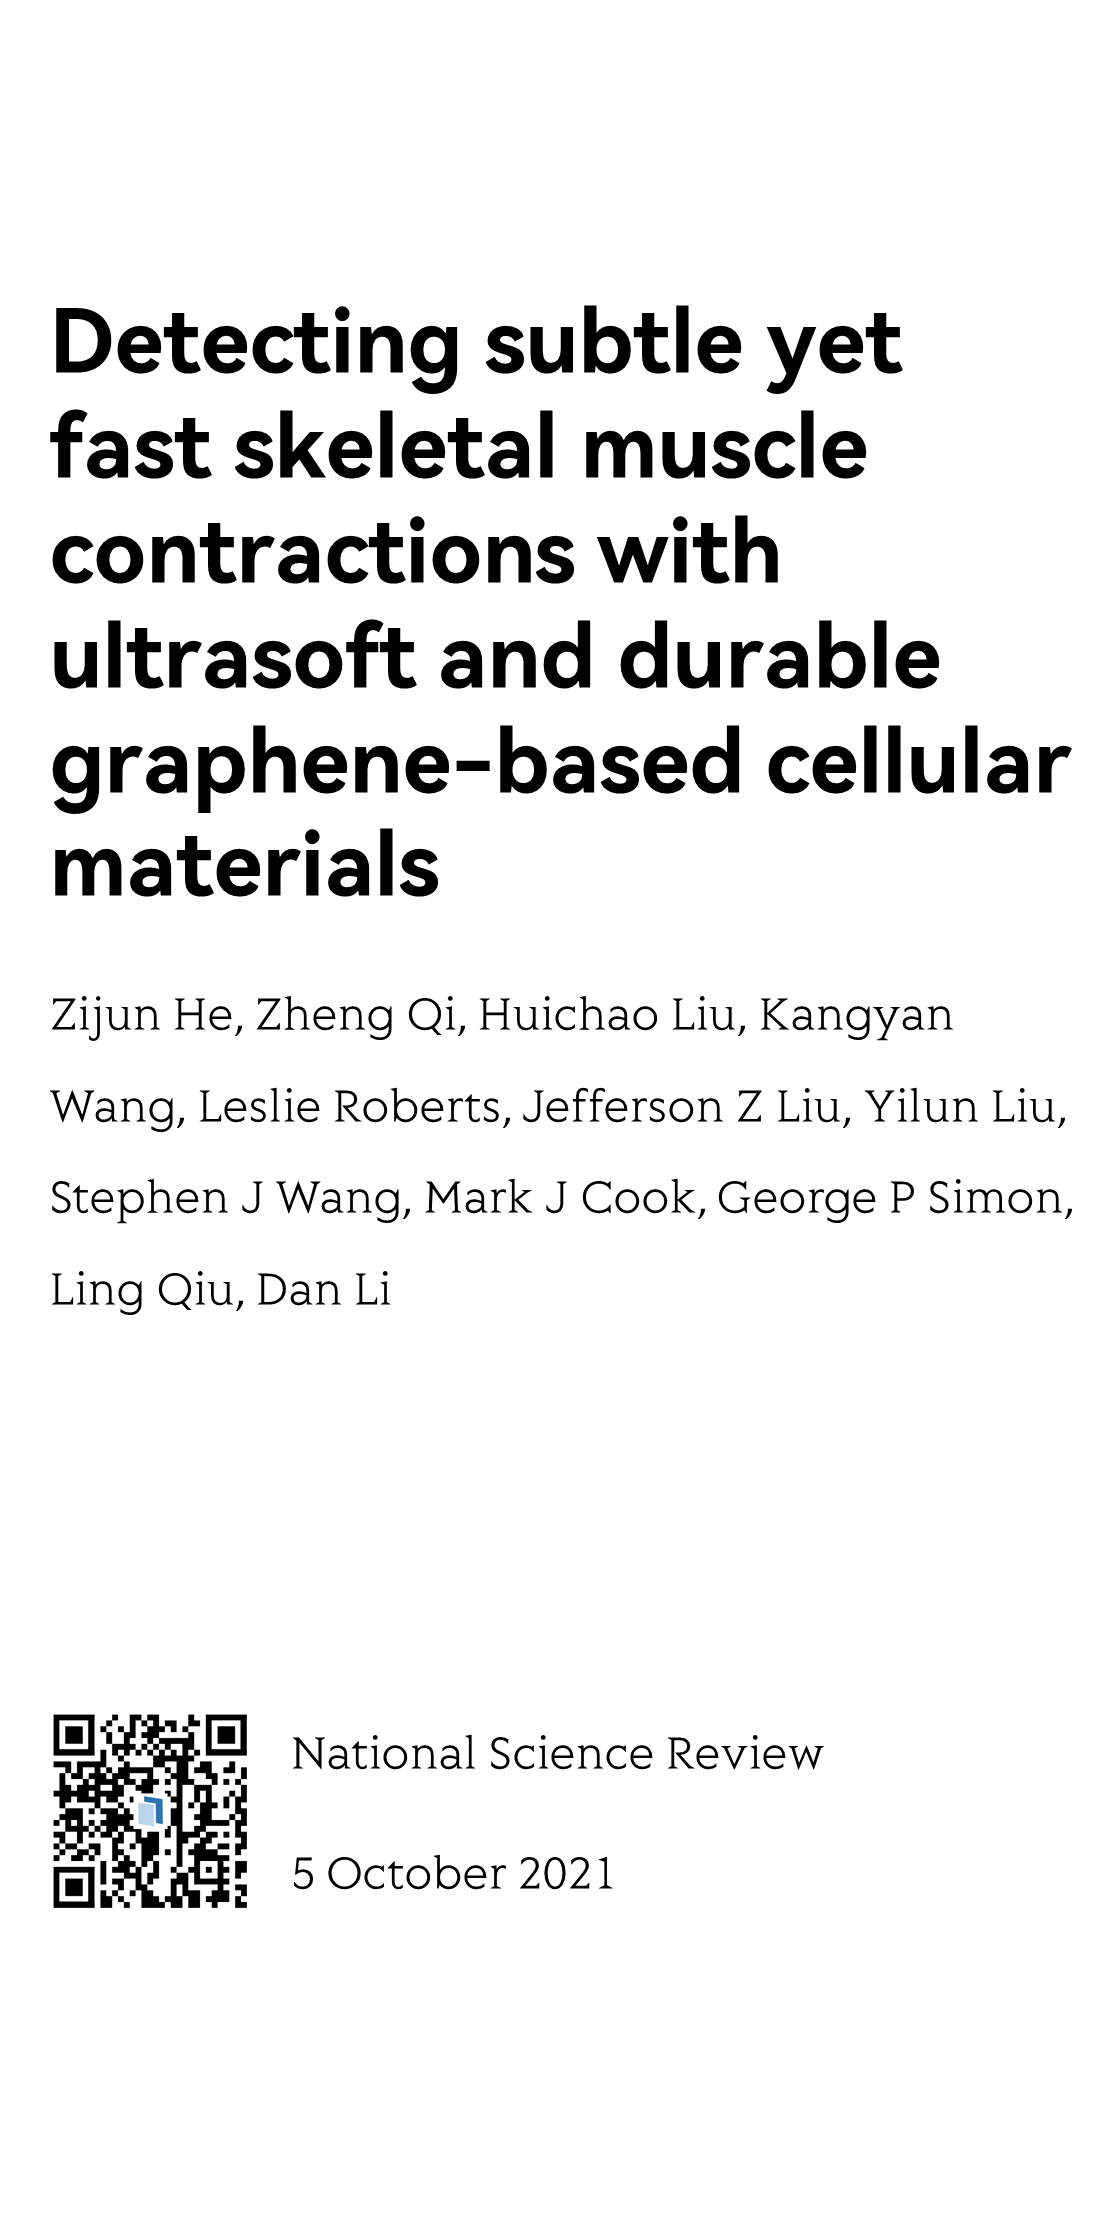 Detecting subtle yet fast skeletal muscle contractions with ultrasoft and durable graphene-based cellular materials_1